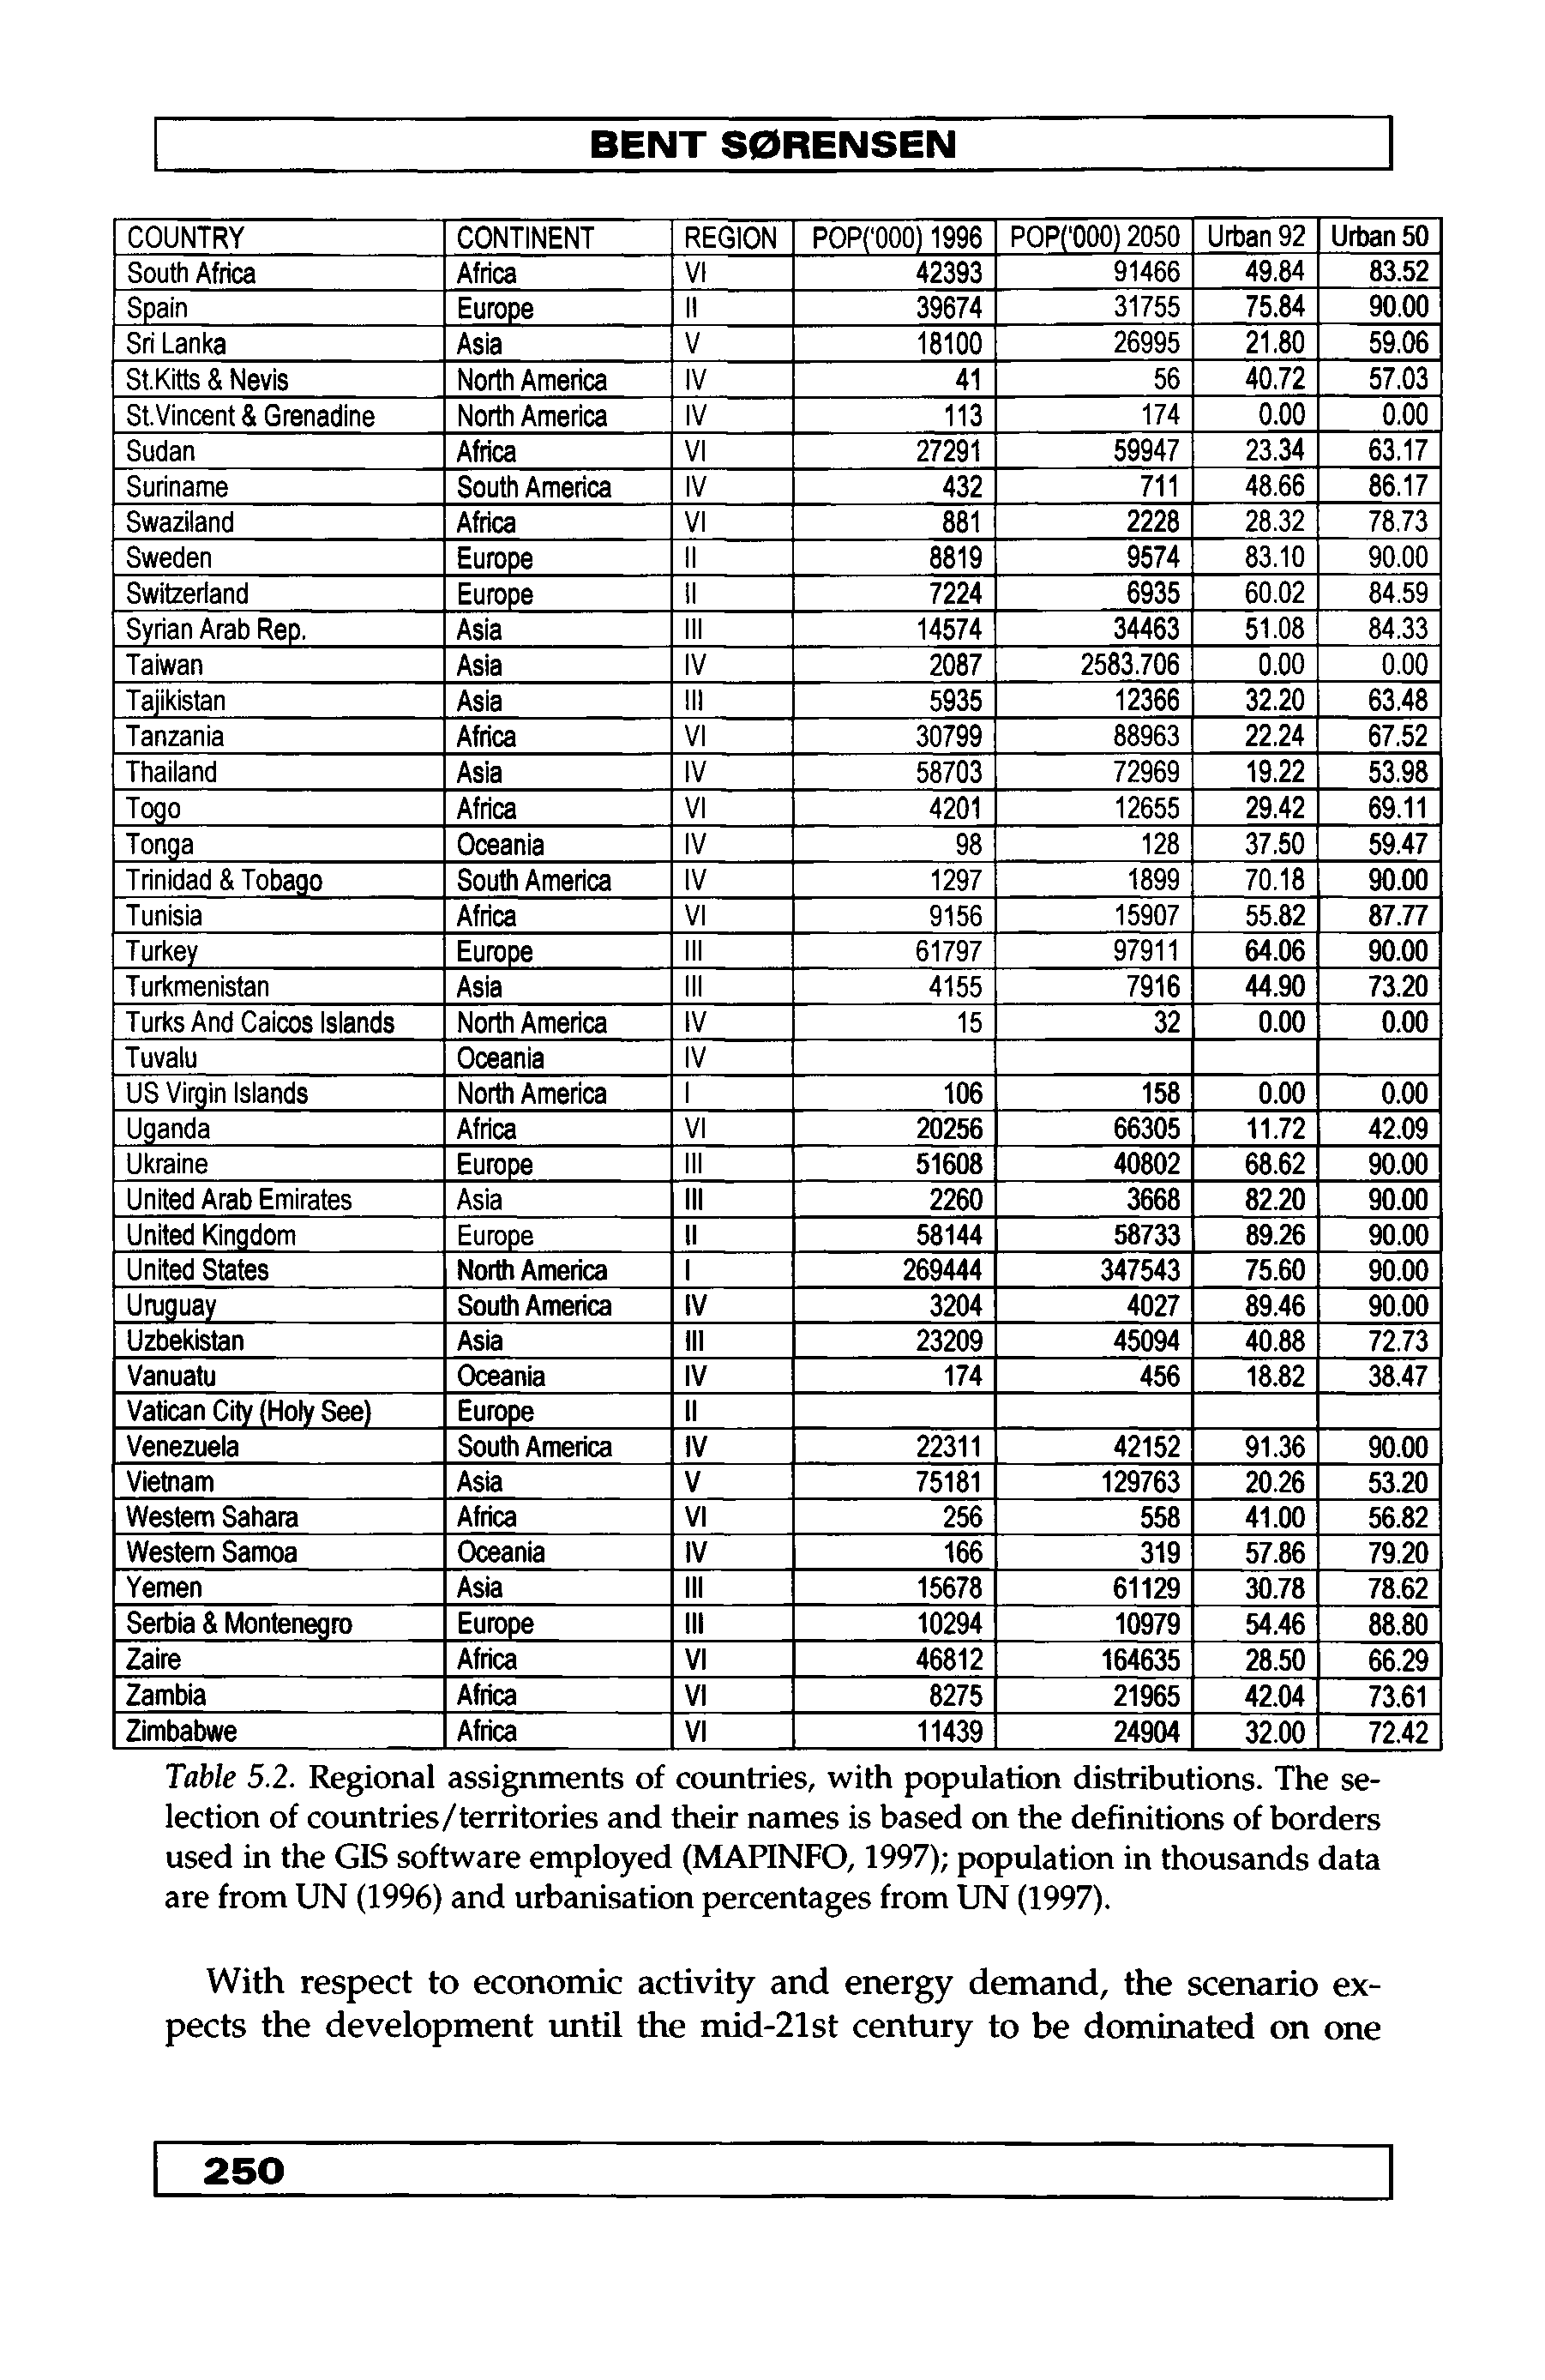 Table 5.2. Regional assignments of countries, with population distributions. The selection of countries/territories and their names is based on the definitions of borders used in the GIS software employed (MAPINFO, 1997) population in thousands data are from UN (1996) and urbanisation percentages from UN (1997).